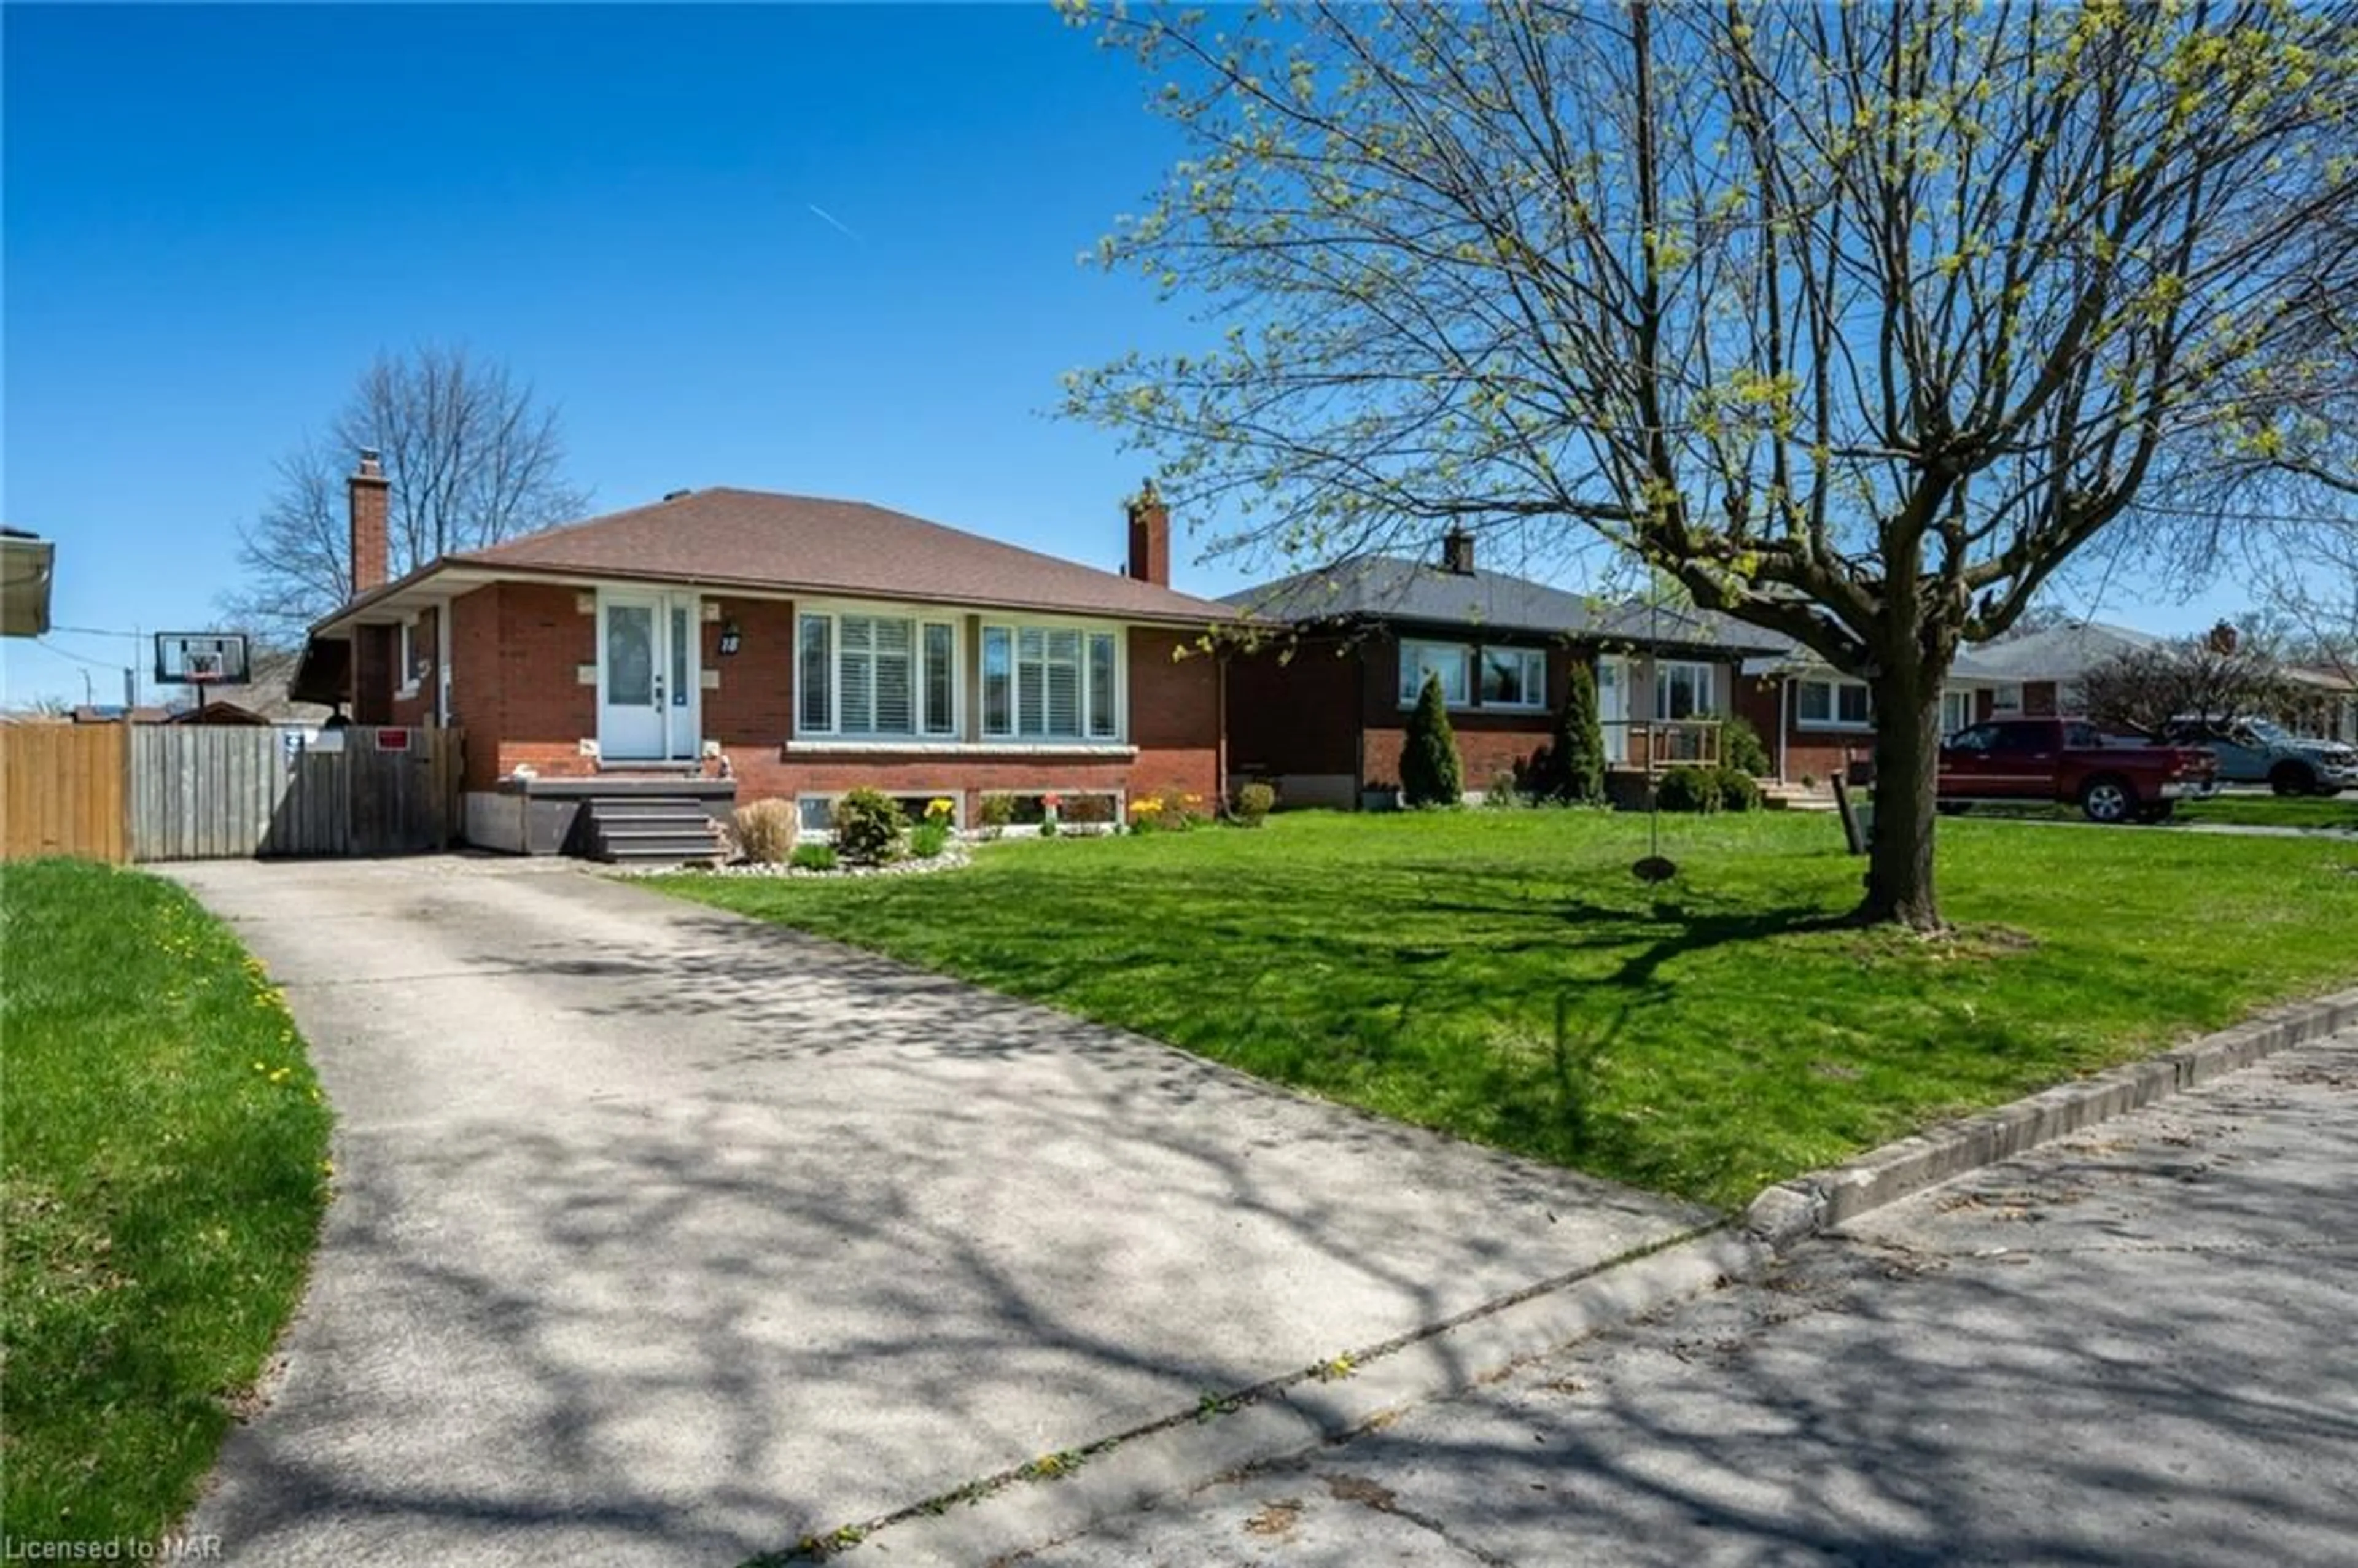 Home with brick exterior material for 18 Milton Rd, St. Catharines Ontario L2P 3E8